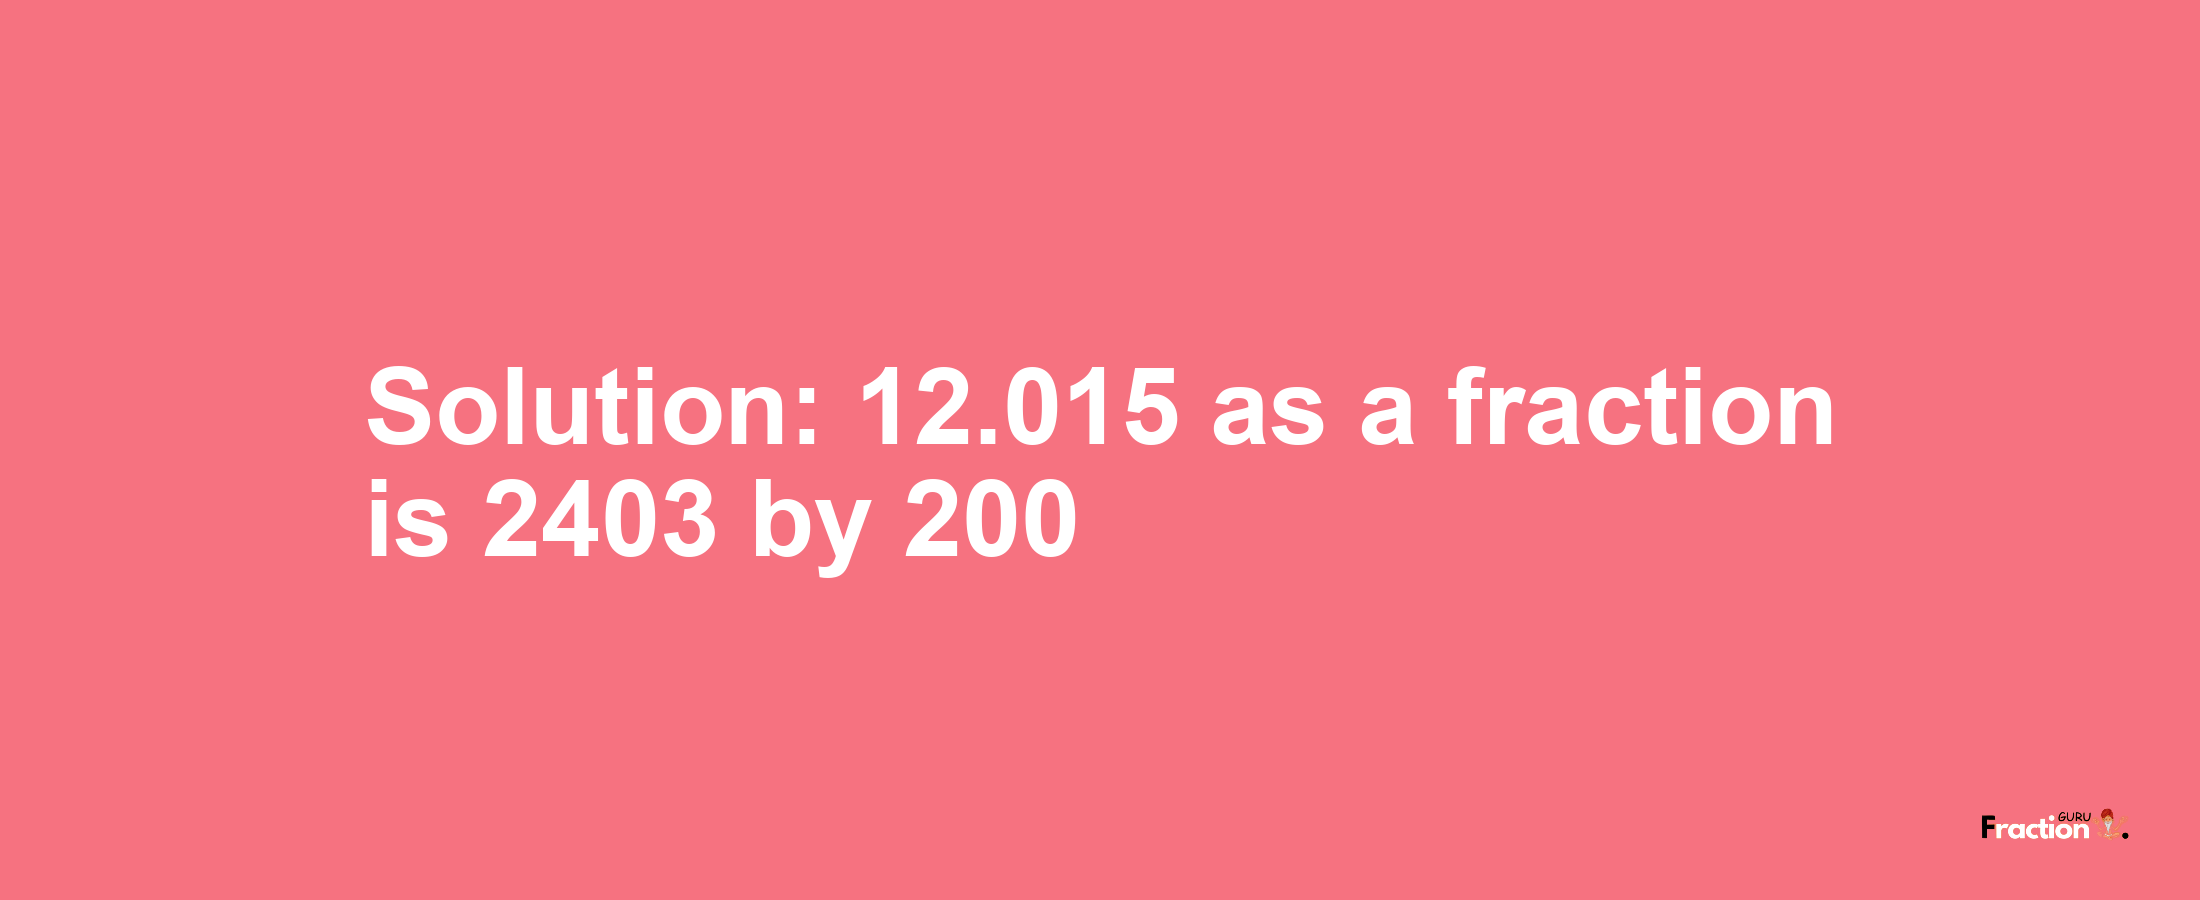 Solution:12.015 as a fraction is 2403/200